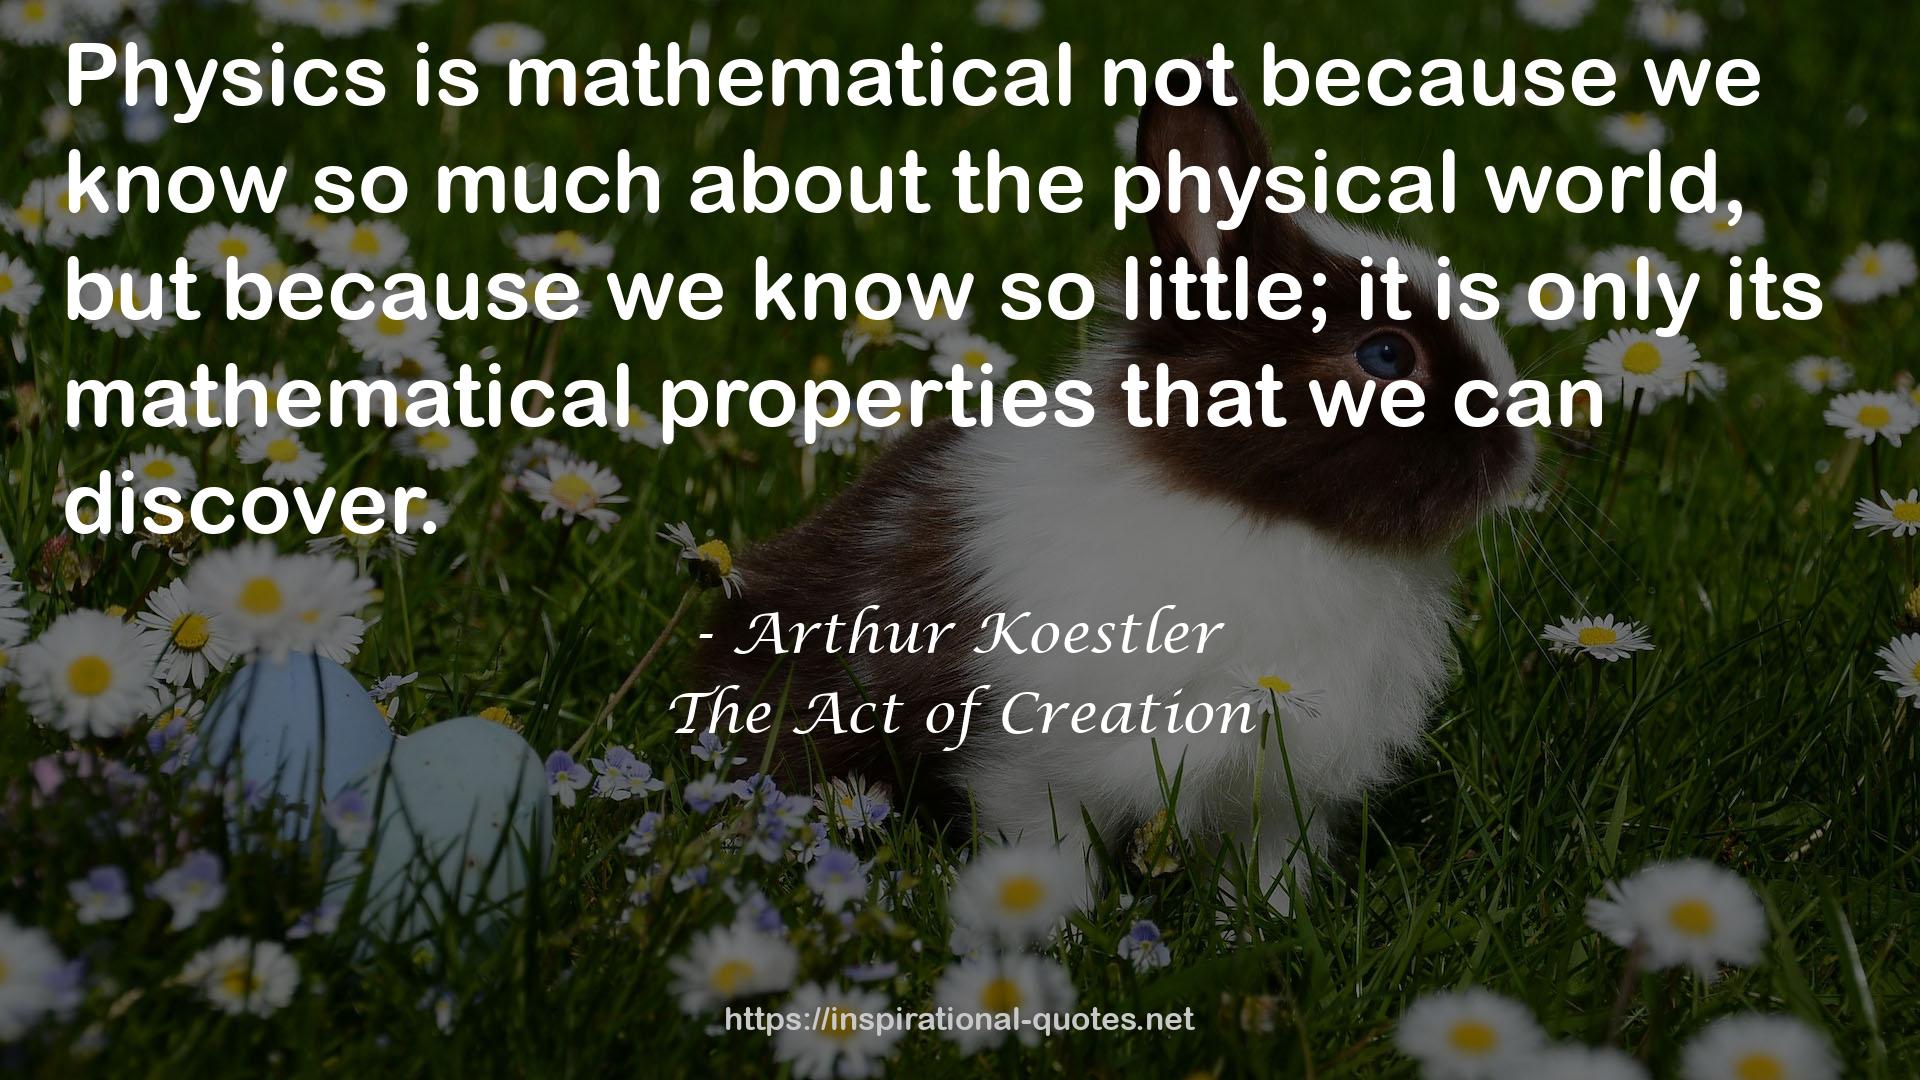 The Act of Creation QUOTES